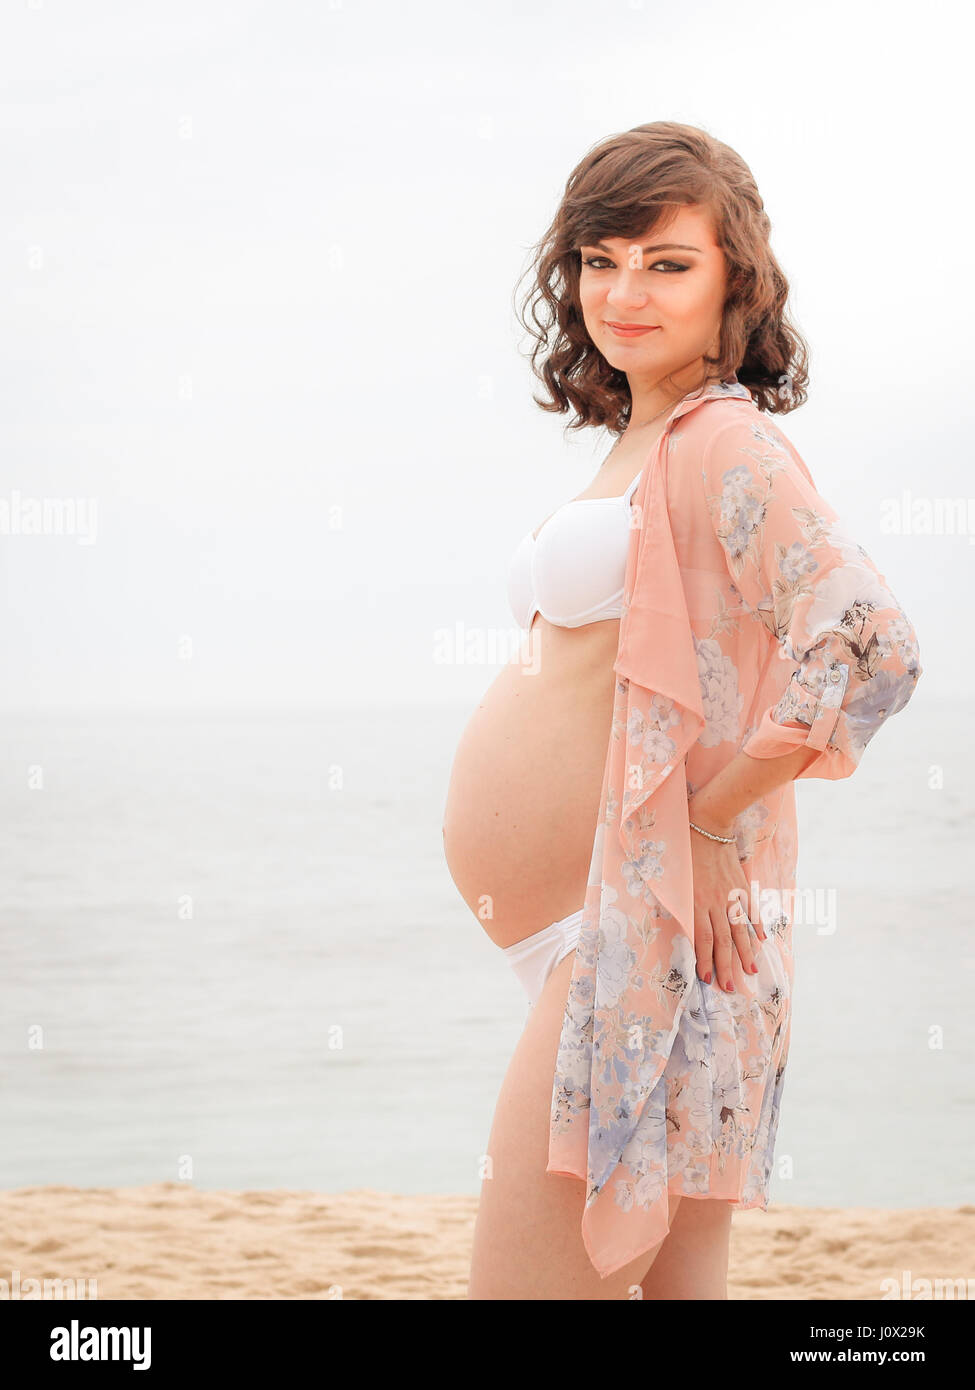 Pregnant woman Standing on beach Stock Photo